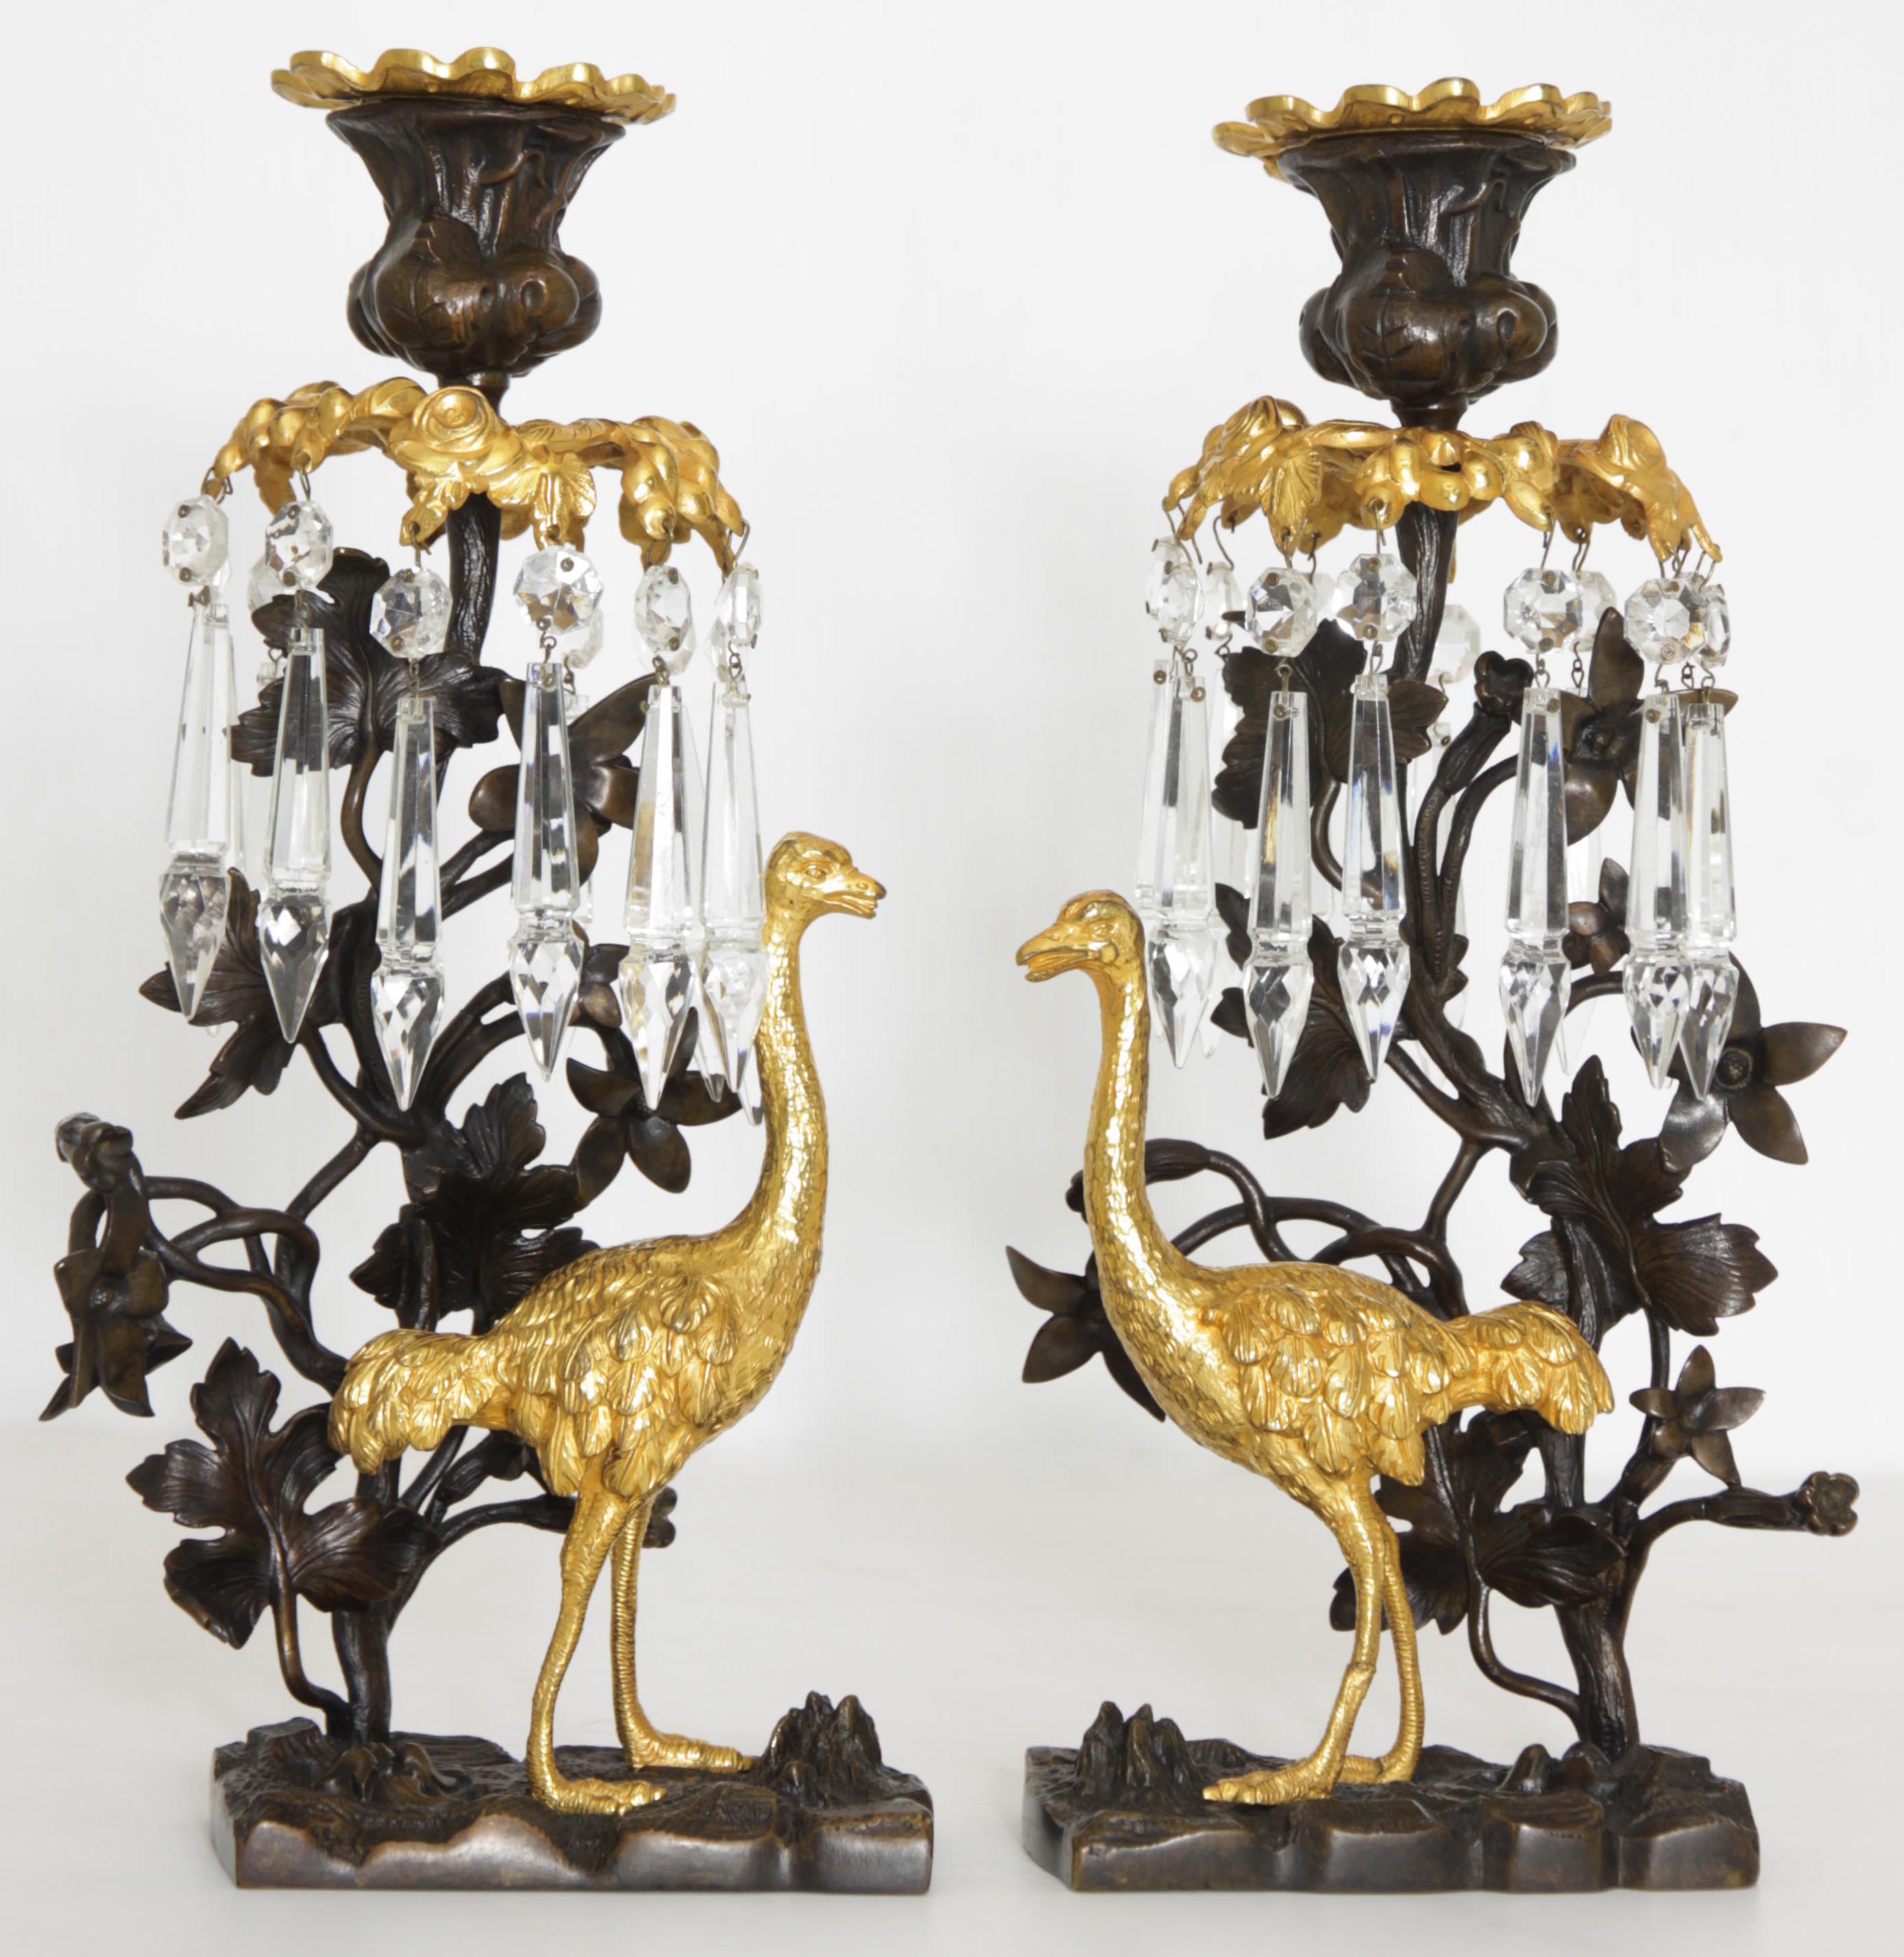 Click to see full size: A pair early 19th century Ostrich bronze, ormolu cut glass candlesticks / sconces